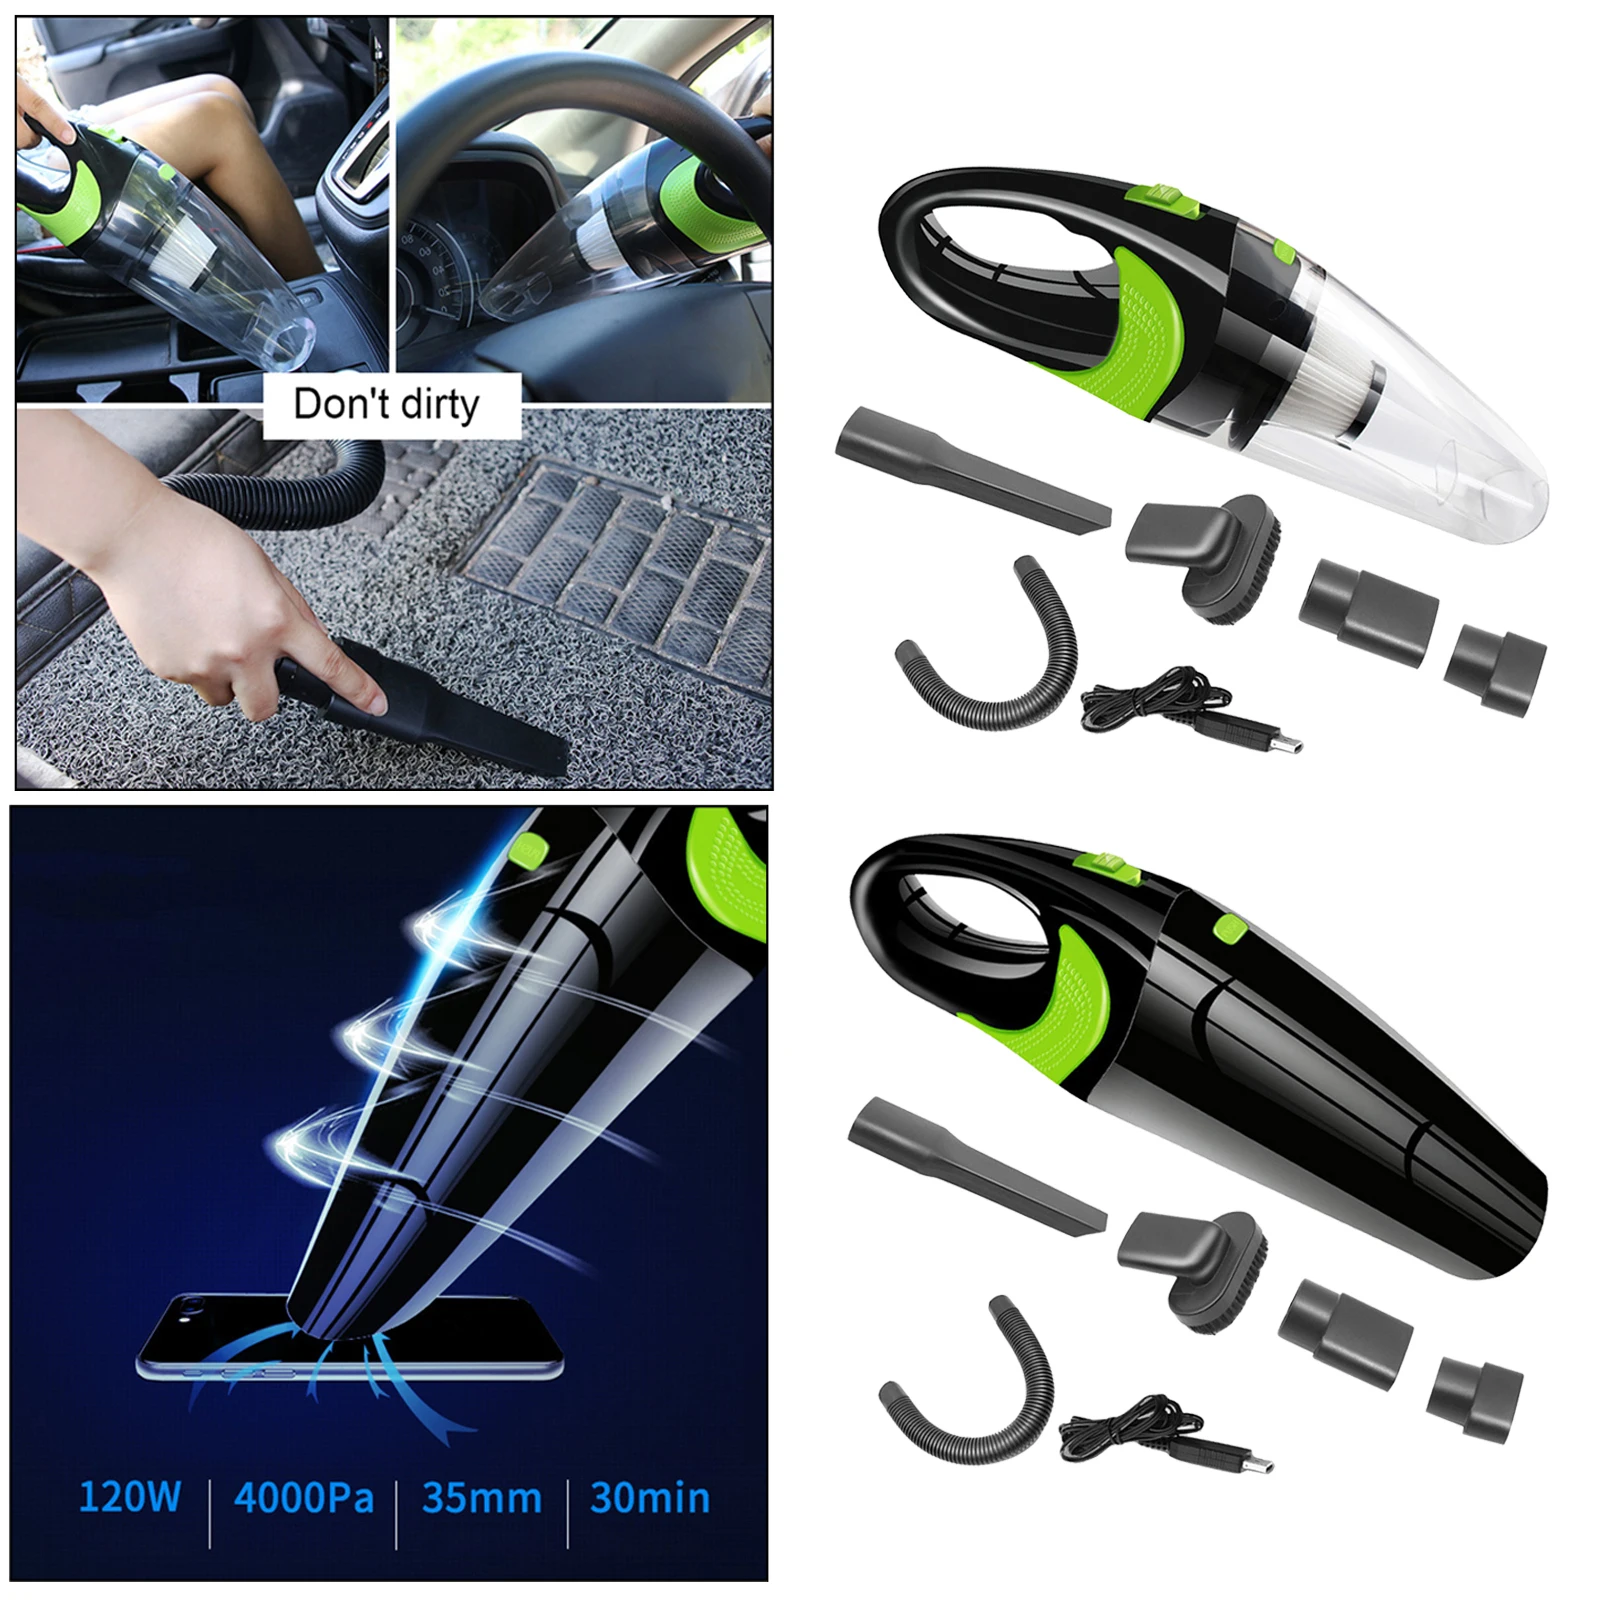 Handheld Car Vacuum Cordless 120W High Power Rechargeable Wet/Dry Use for Car Interior Detailing Auto Cleaning